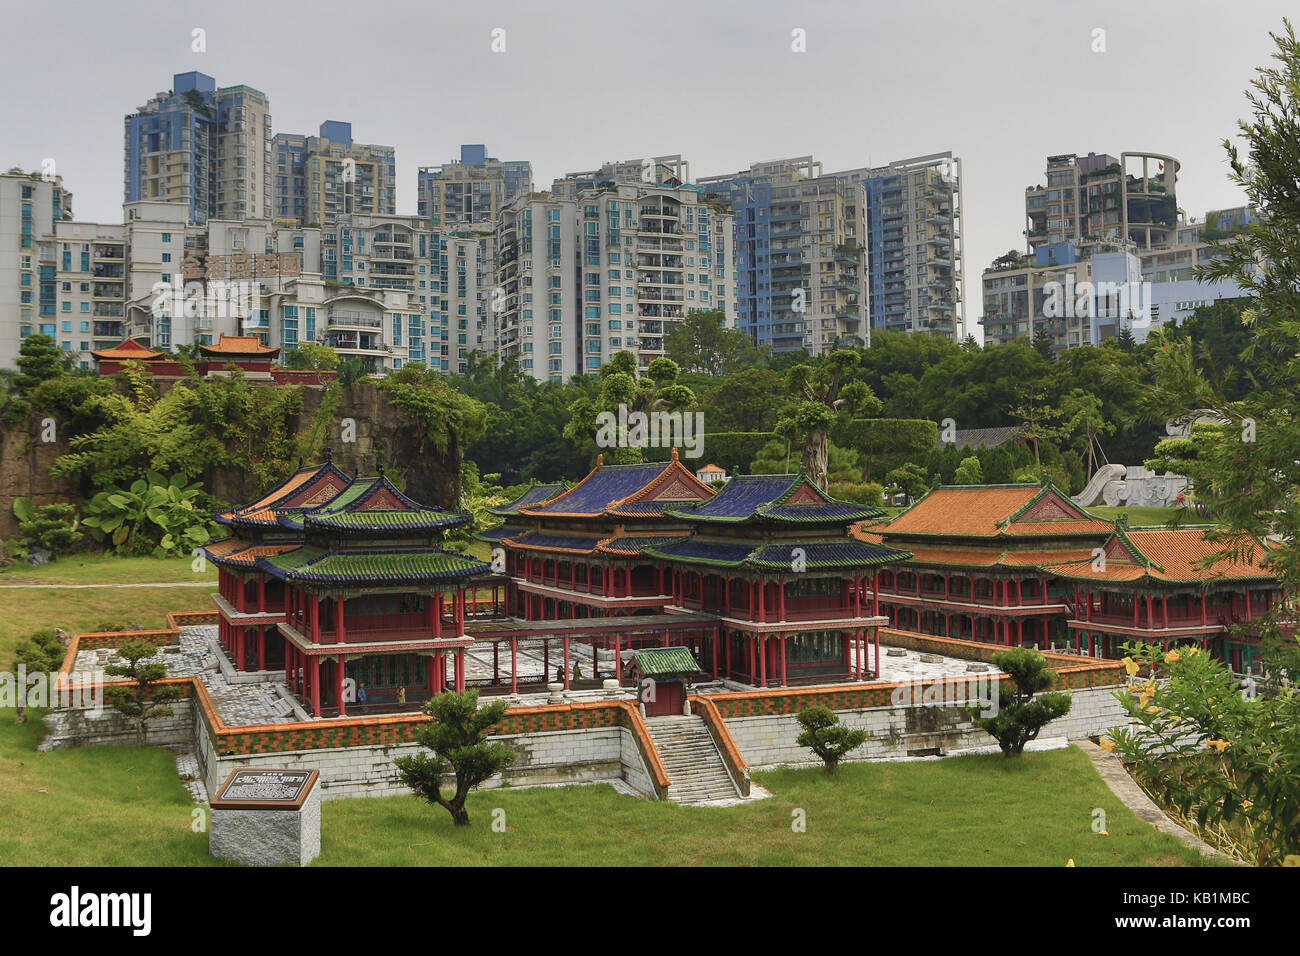 Temple with skyline in the background, Splendid China park, Shenzhin, Stock Photo